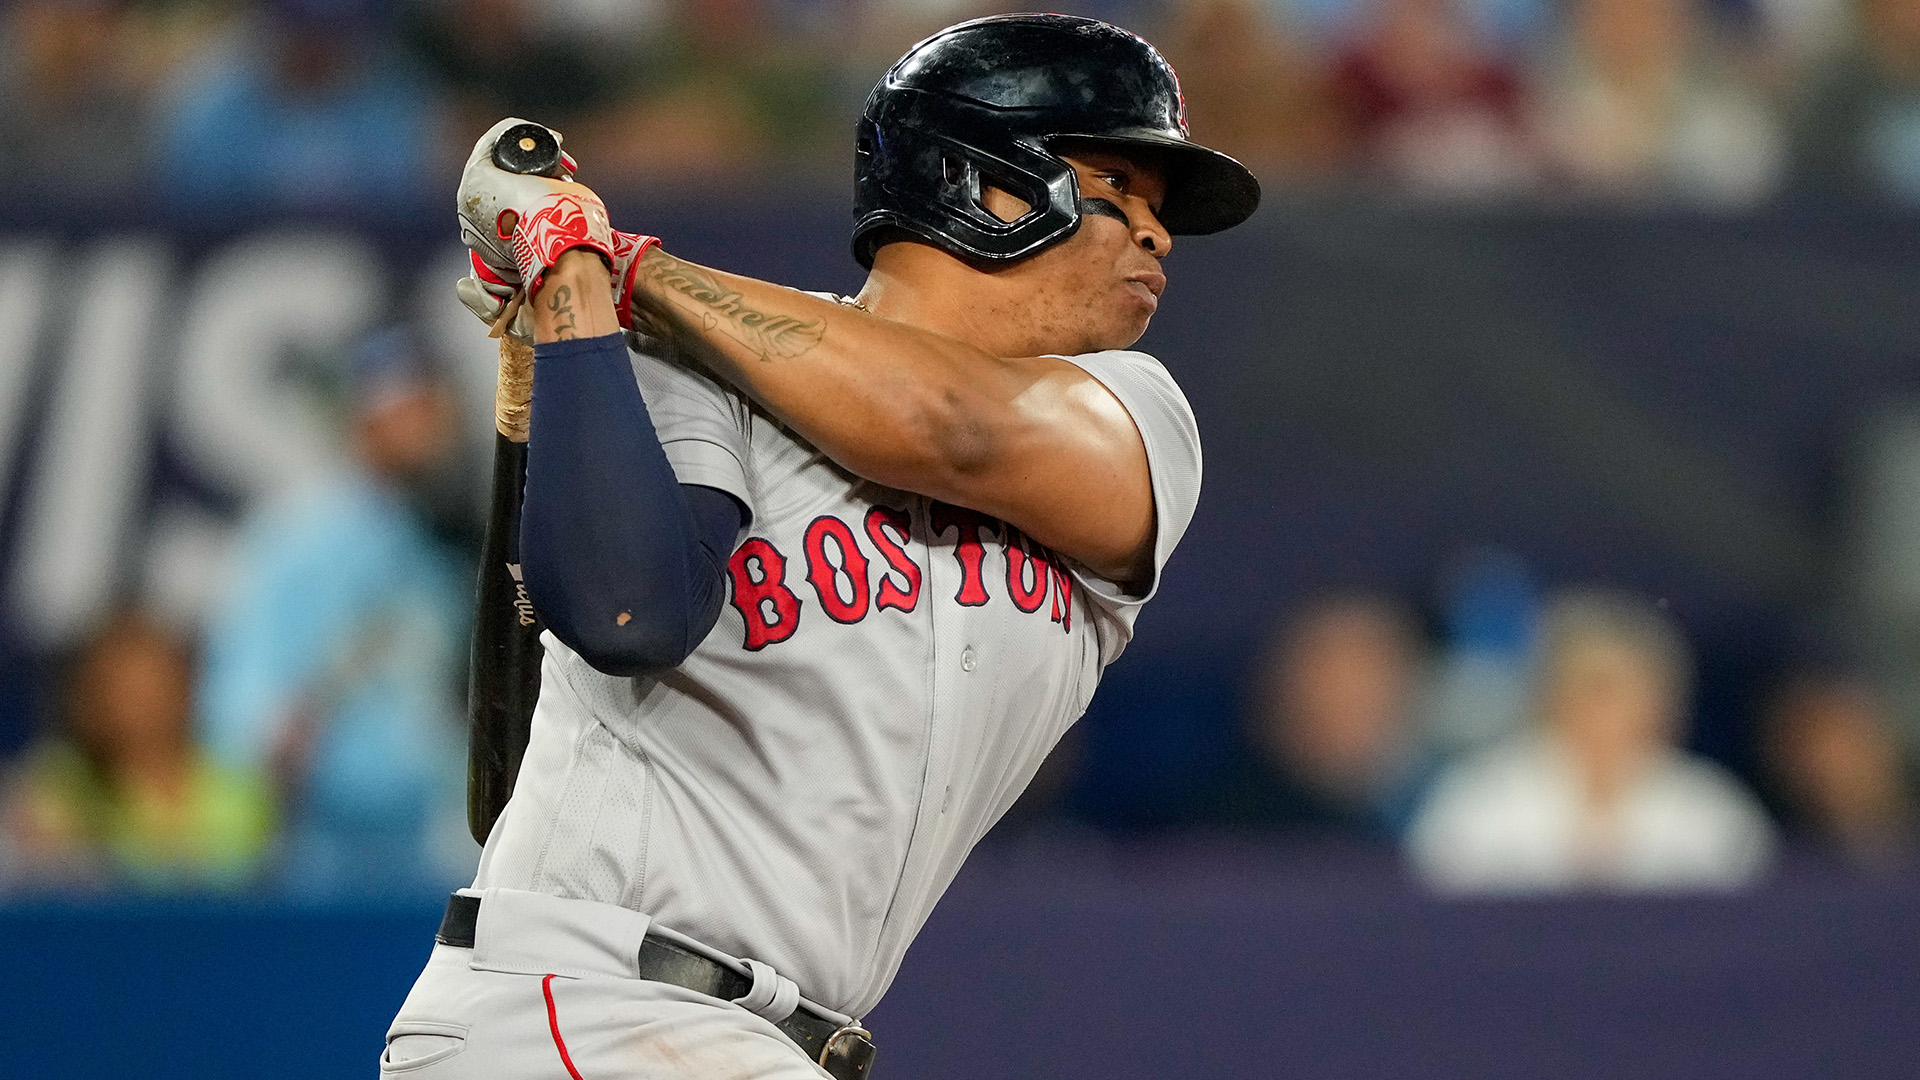 Red Sox ‘Rolling’ Offense Puts Up Six Homers in Series Open Vs.
Cubs